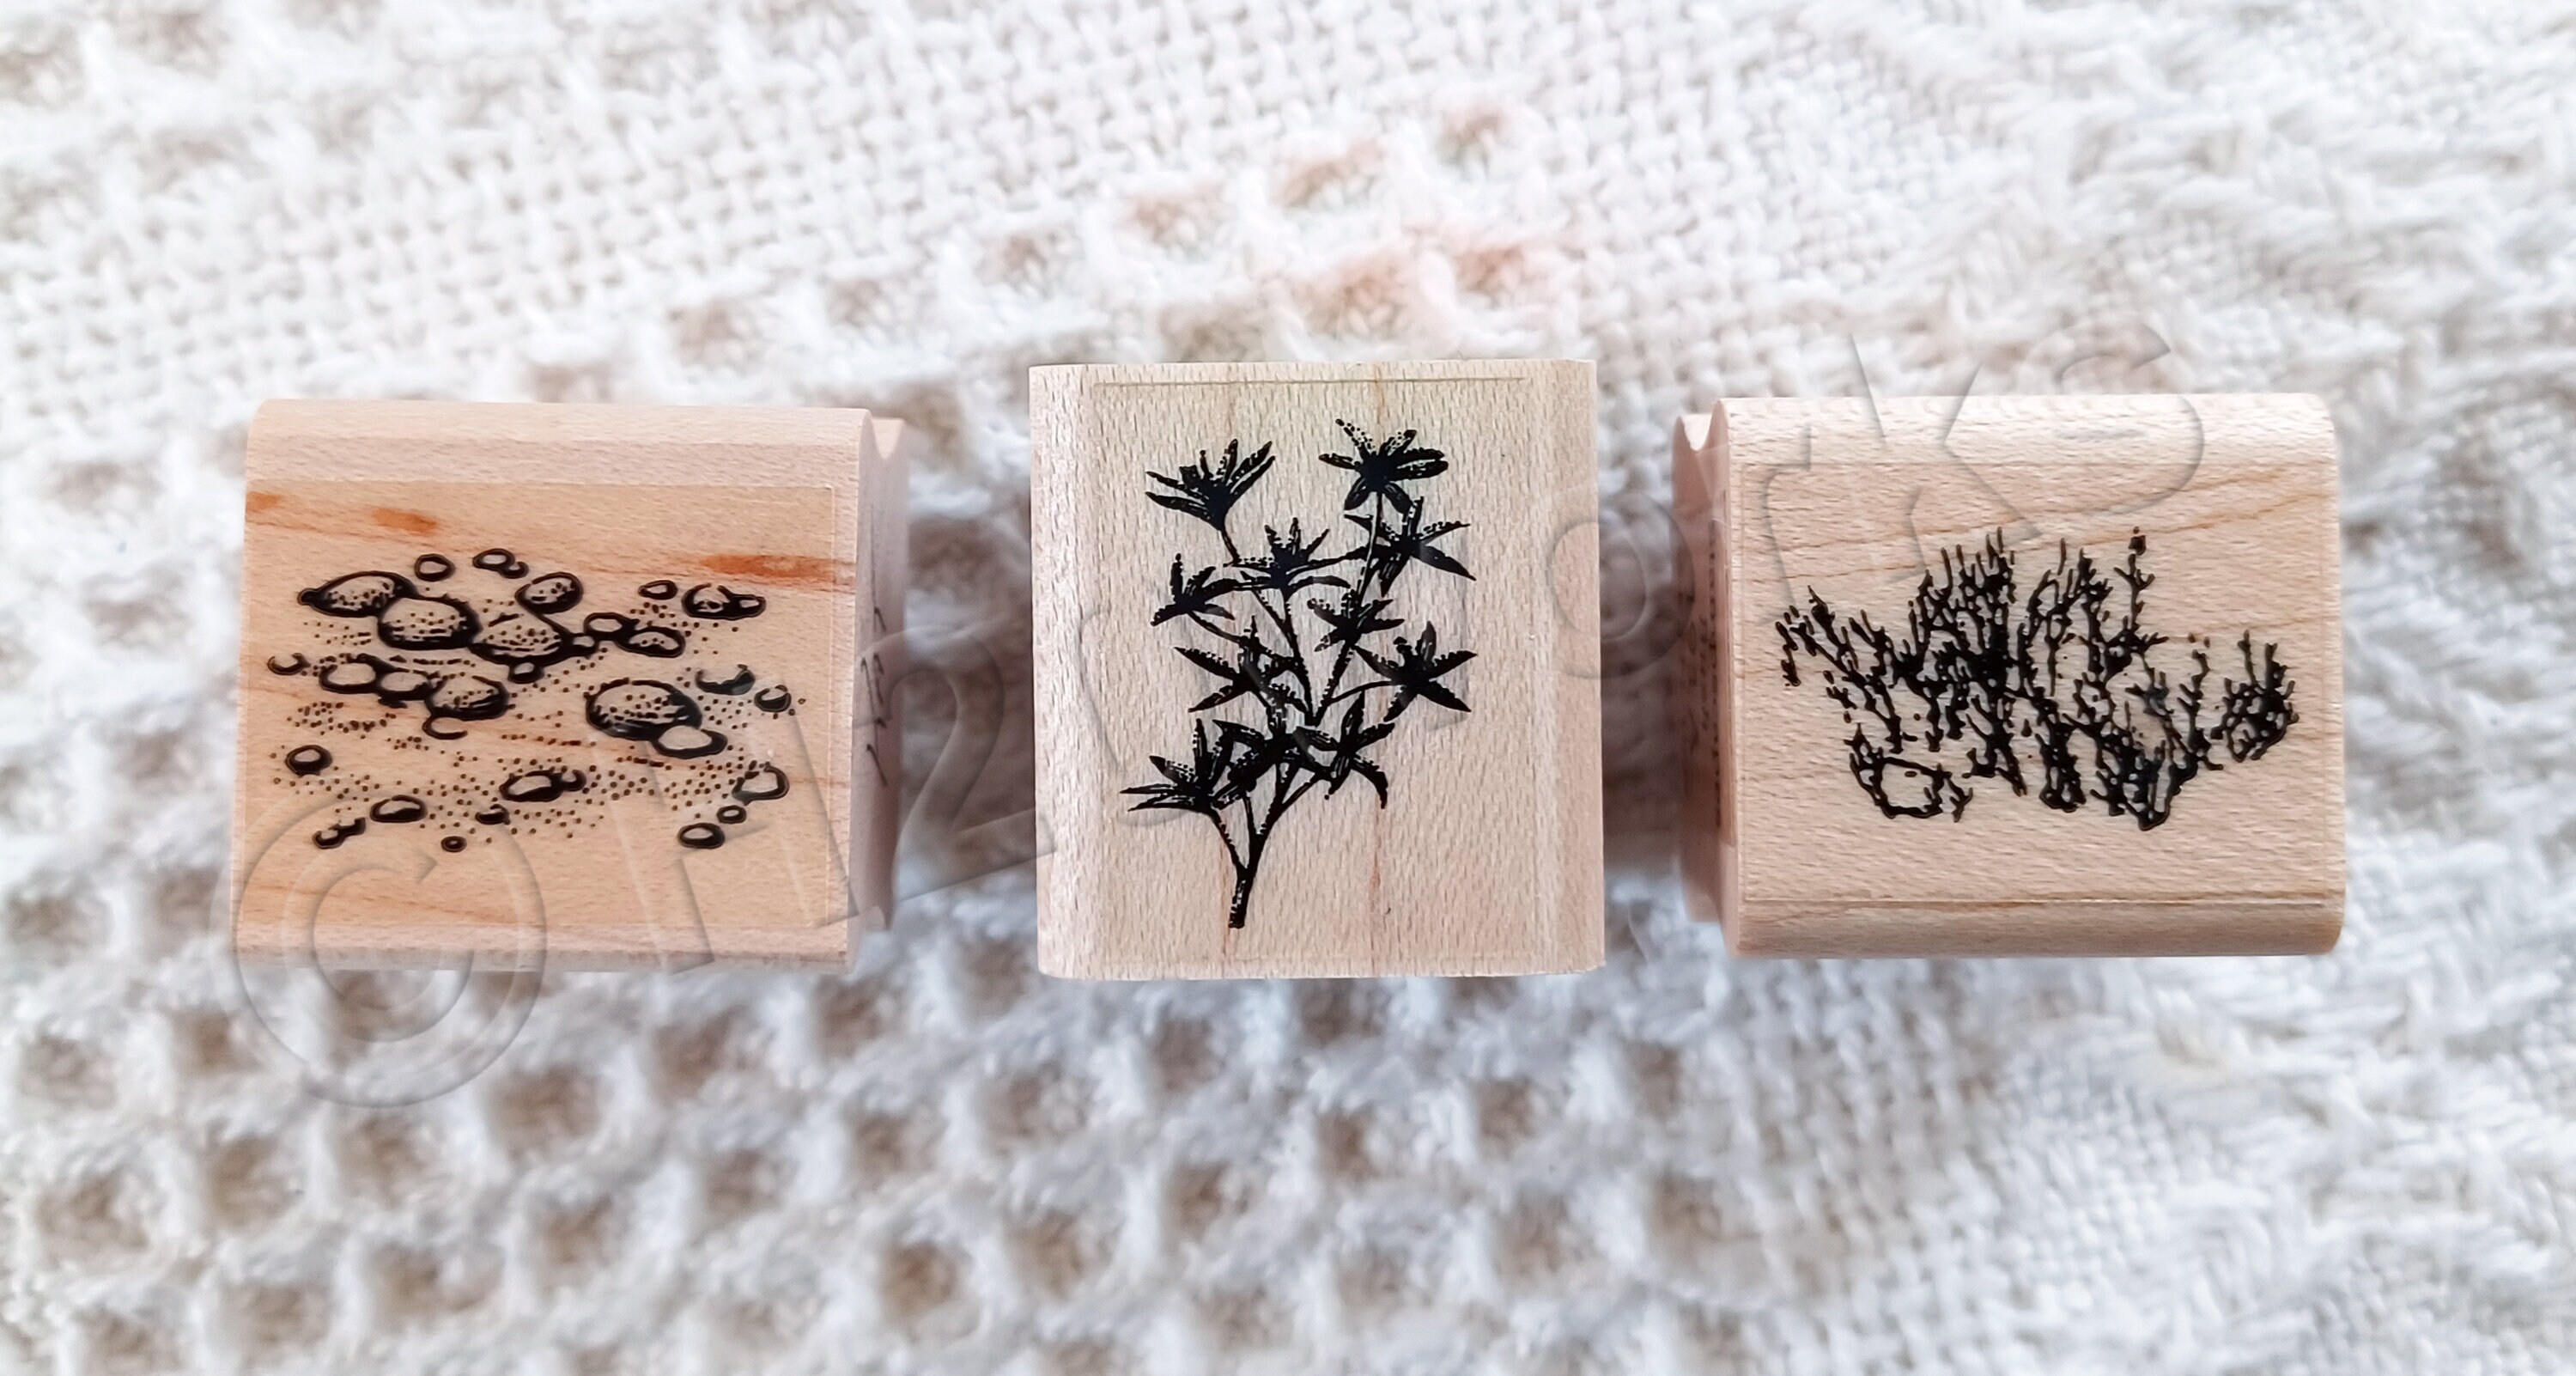 Custom Library Stamp, Personalized Library Rubber Stamp, Librarian Stamps,  Gift for Teachers 